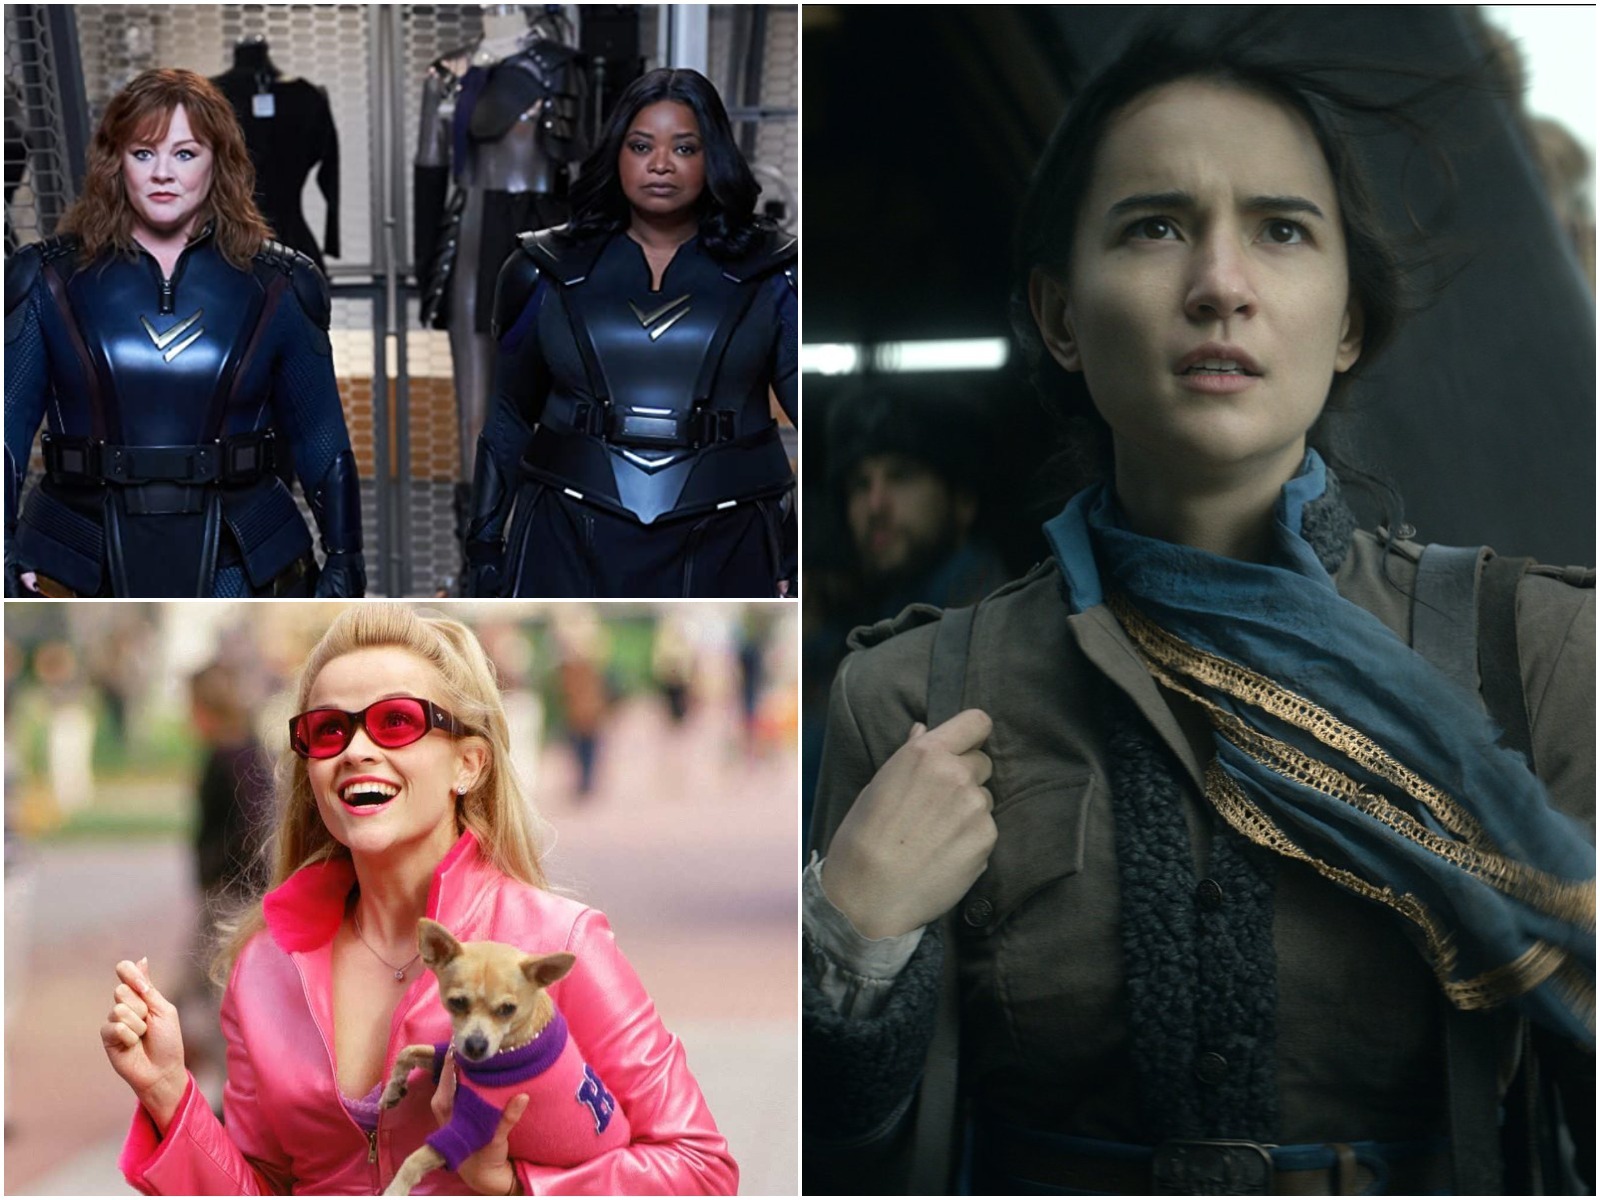 What's new on Netflix in April 2021